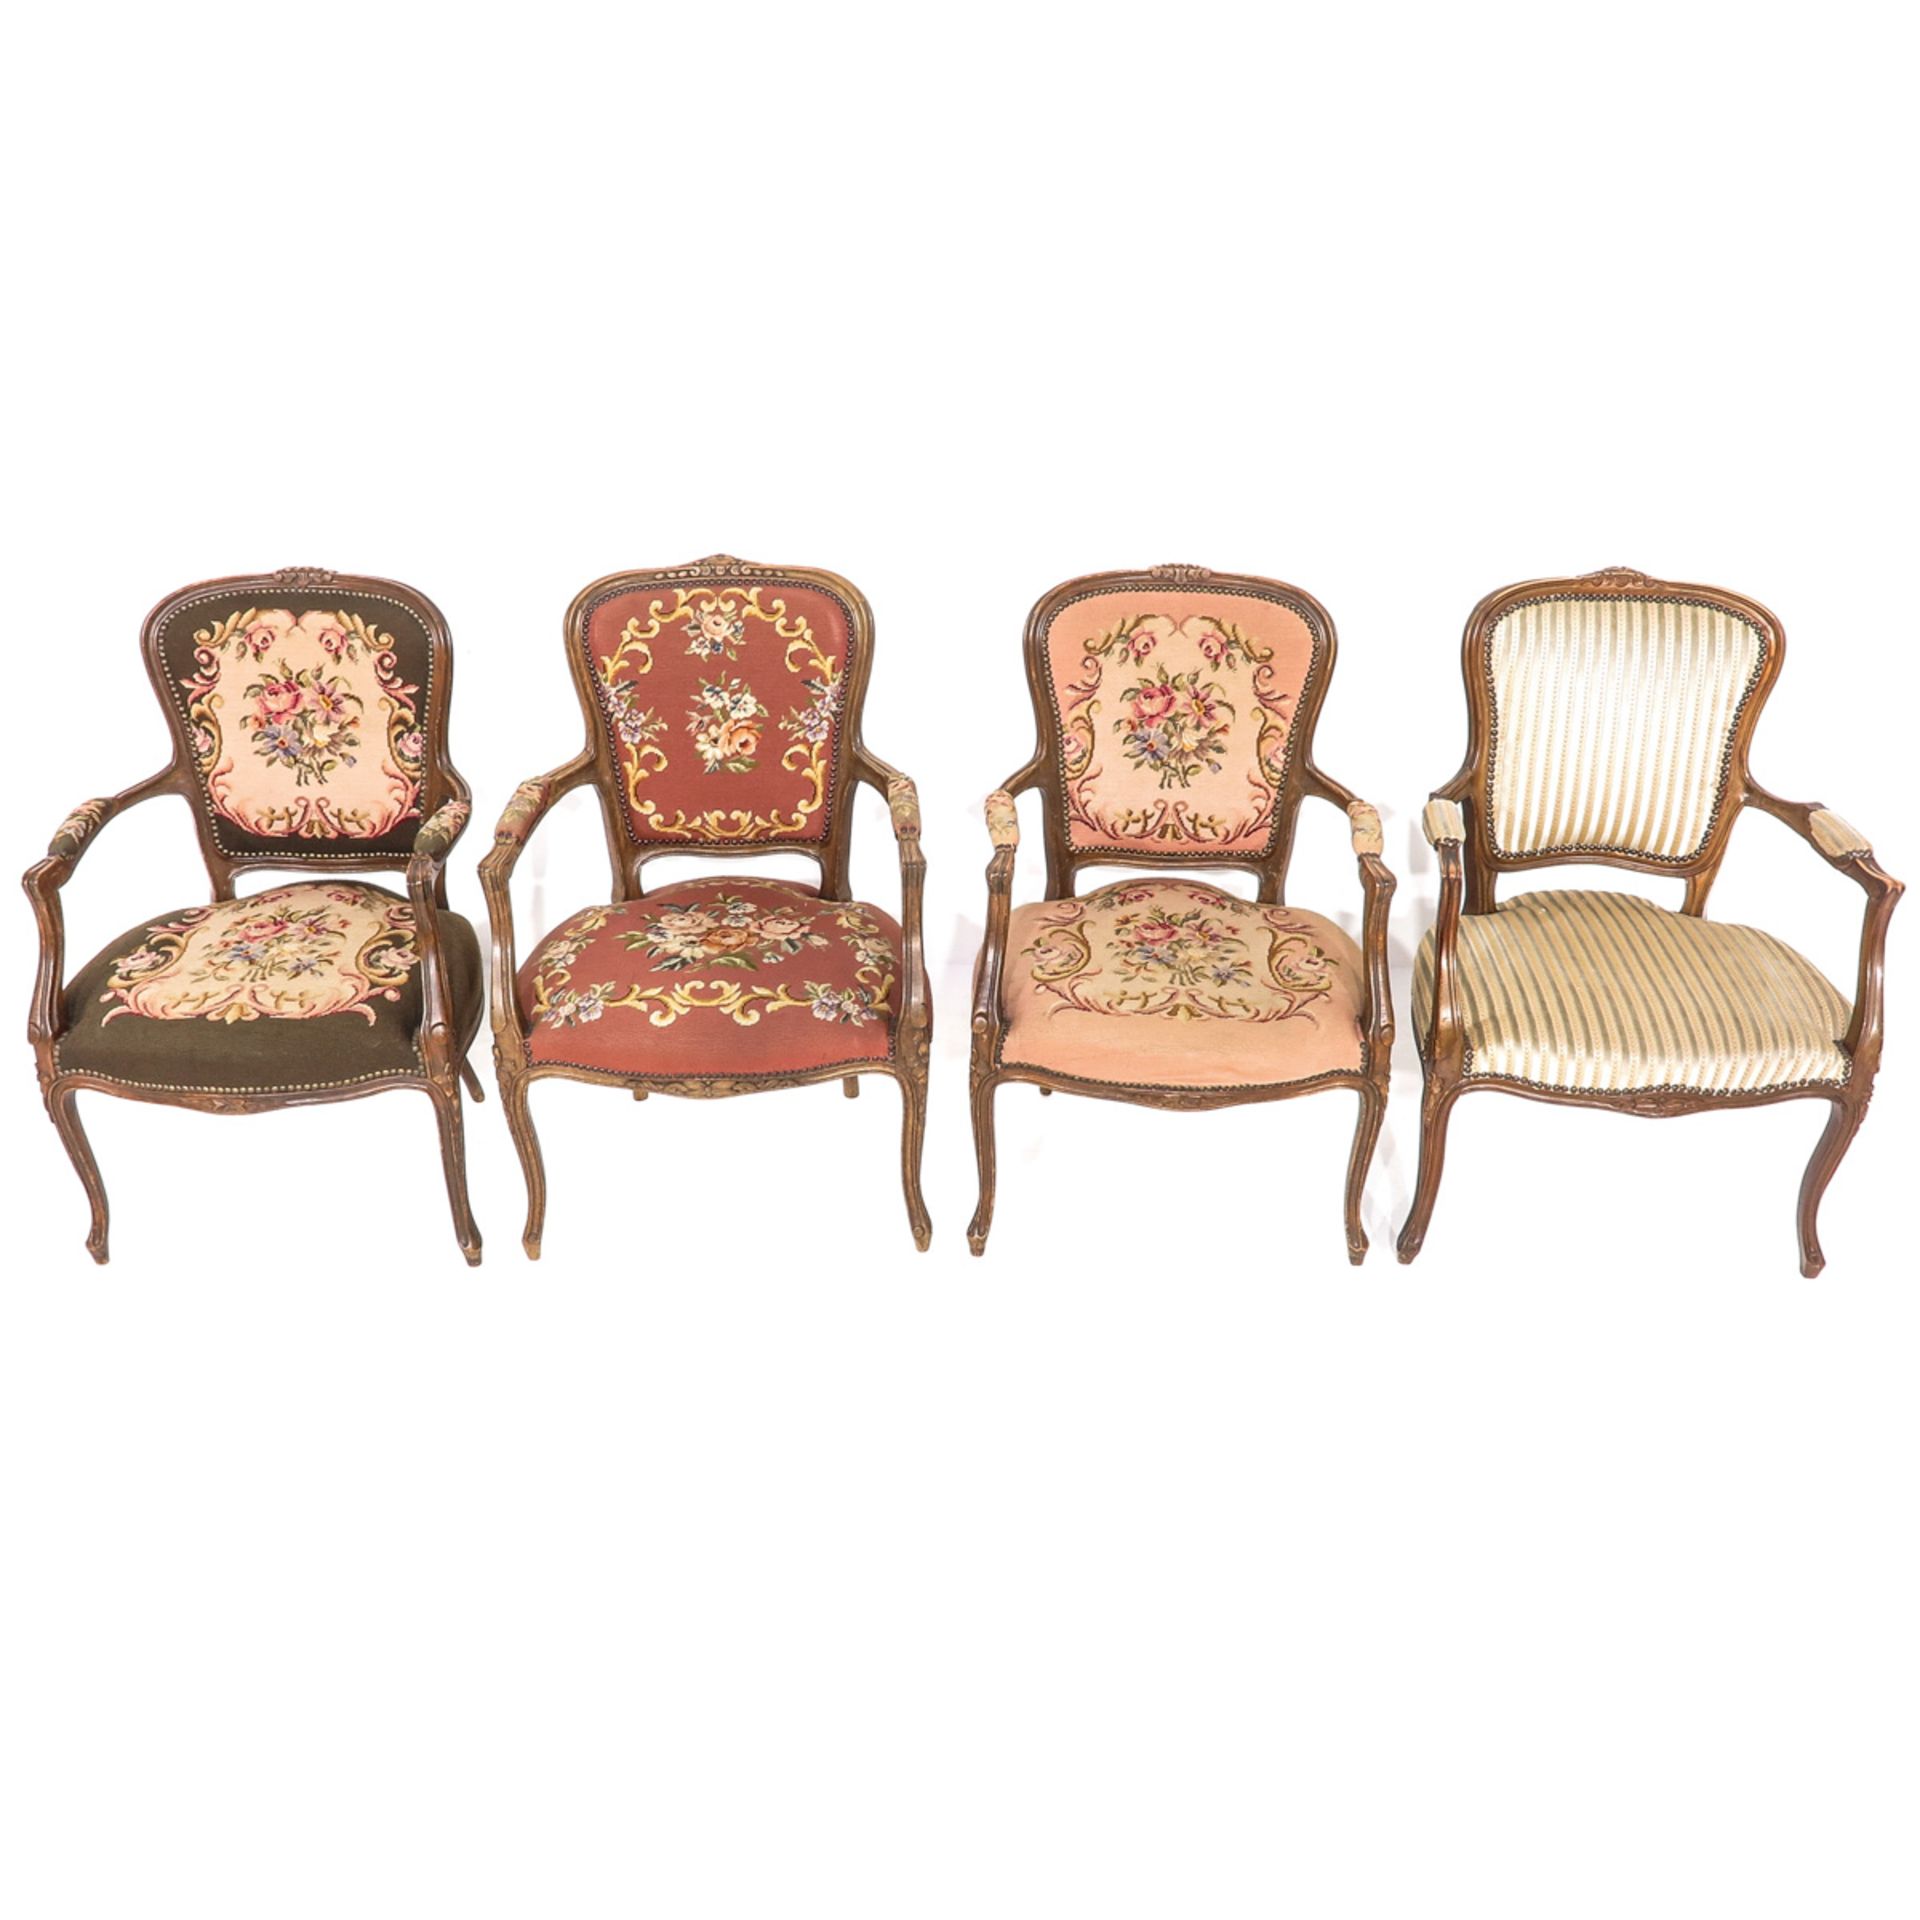 A Lot of 4 Armchairs - Image 5 of 9